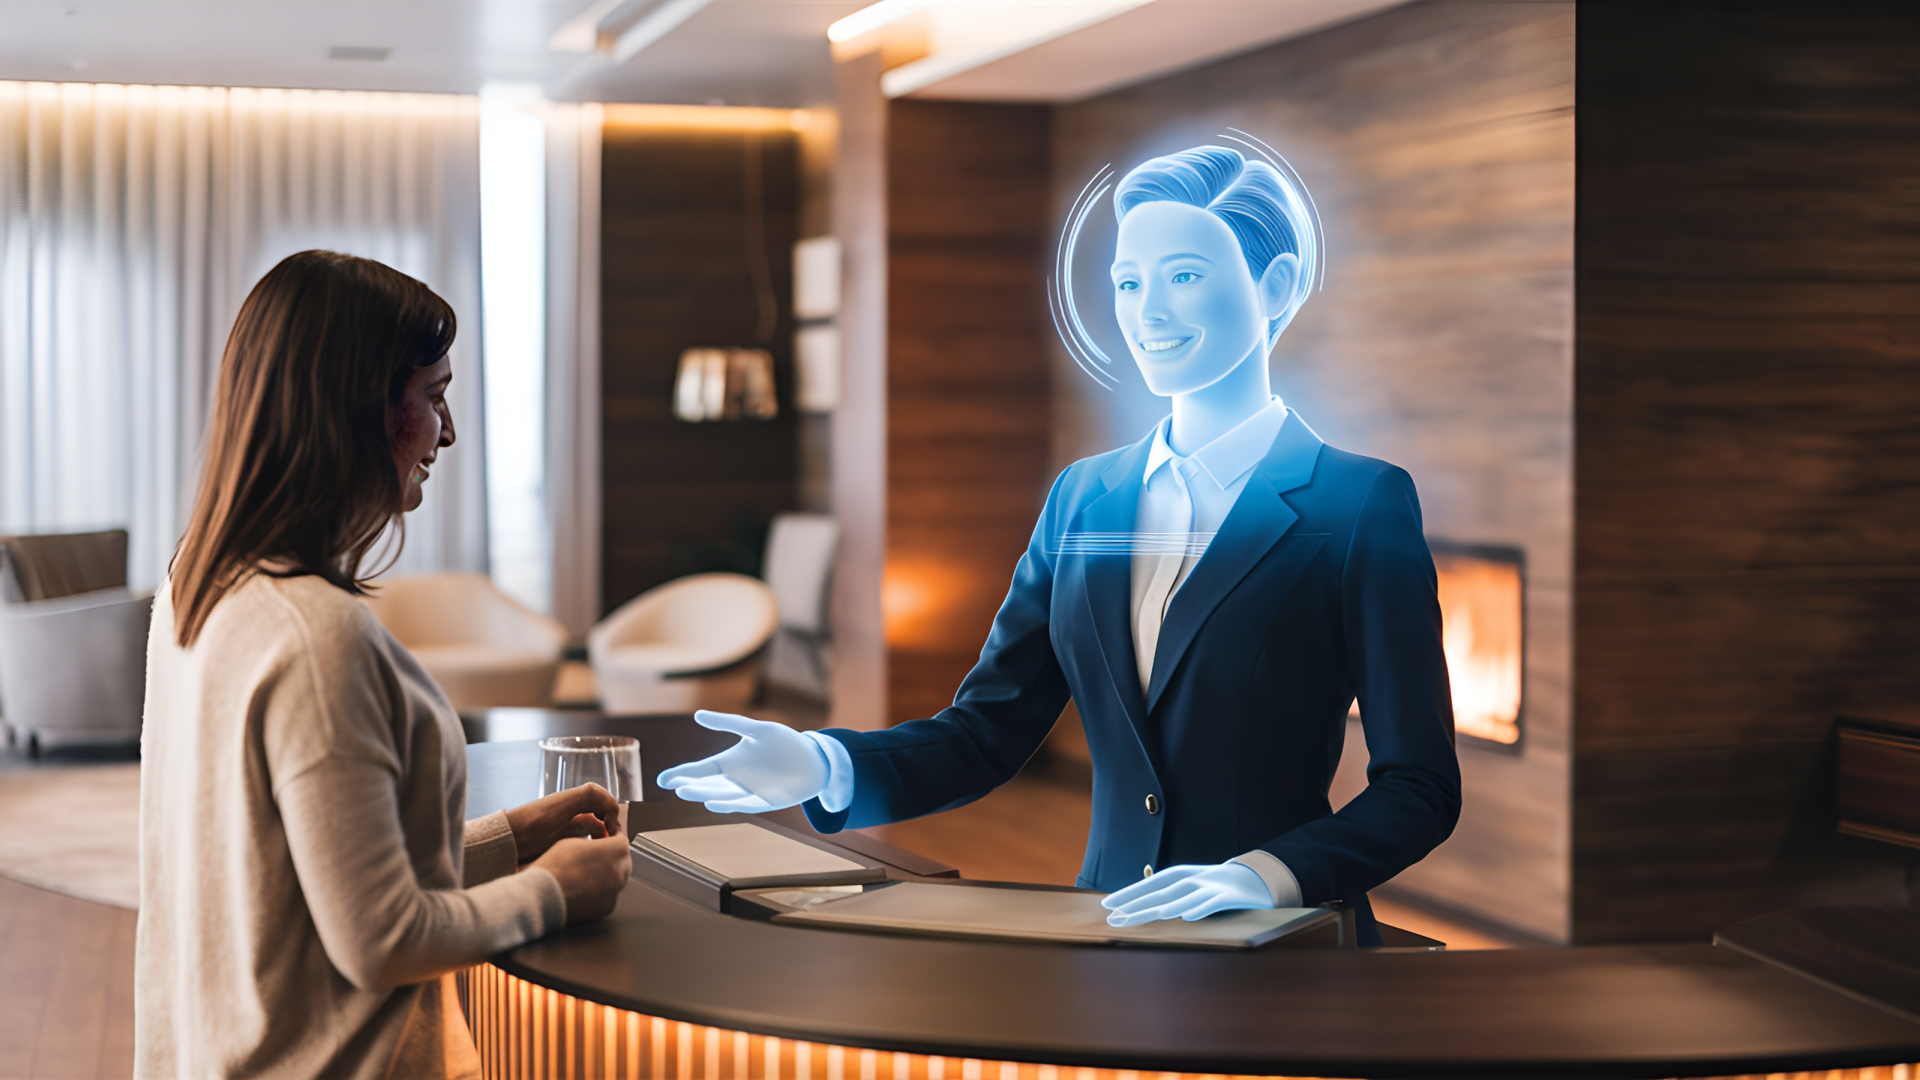 A.I in the Hospitality Industry